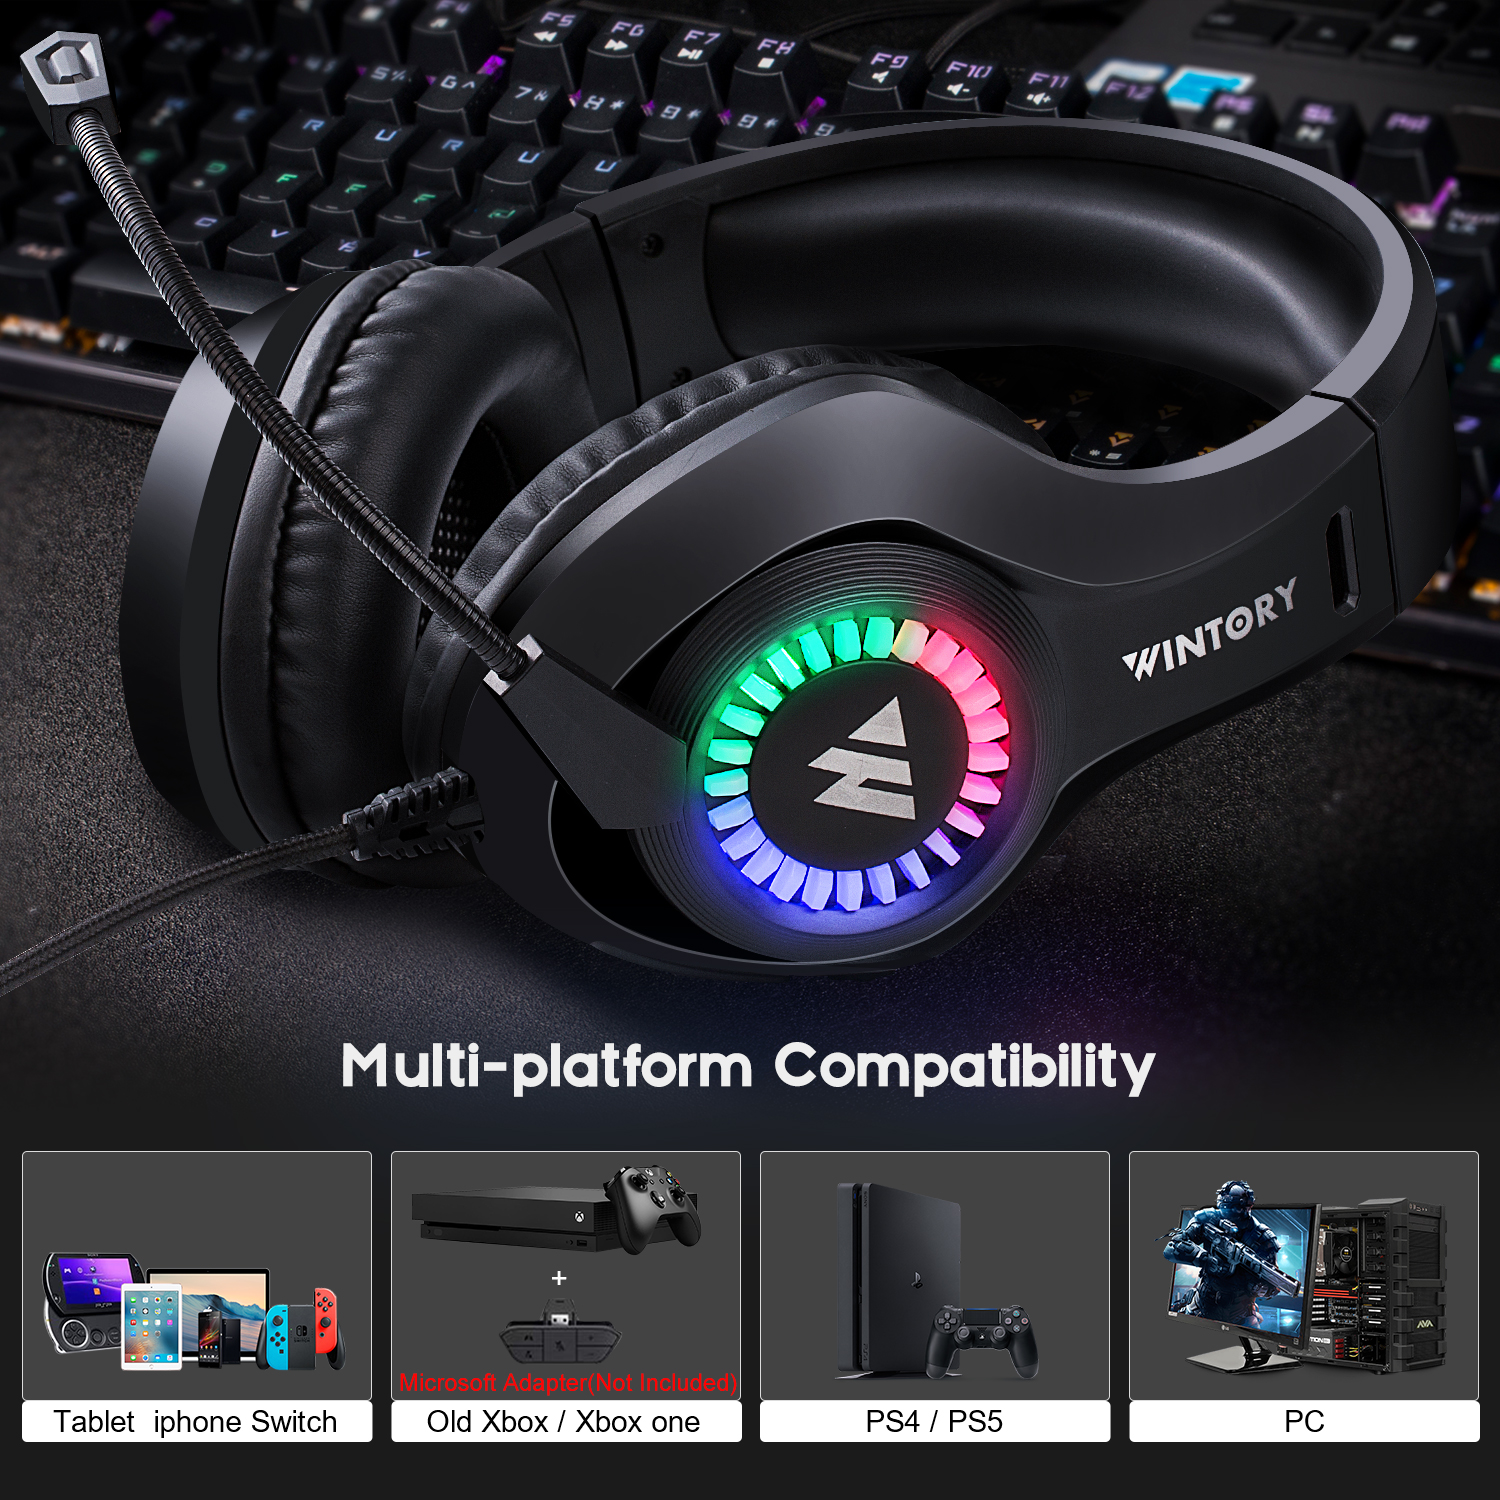 Wintory-M3-Gaming-Headset-Stereo-RGB-Light-50mm-Driver-Stereo-Adjustable-Noise-Canceling-Headphone-w-1910974-3